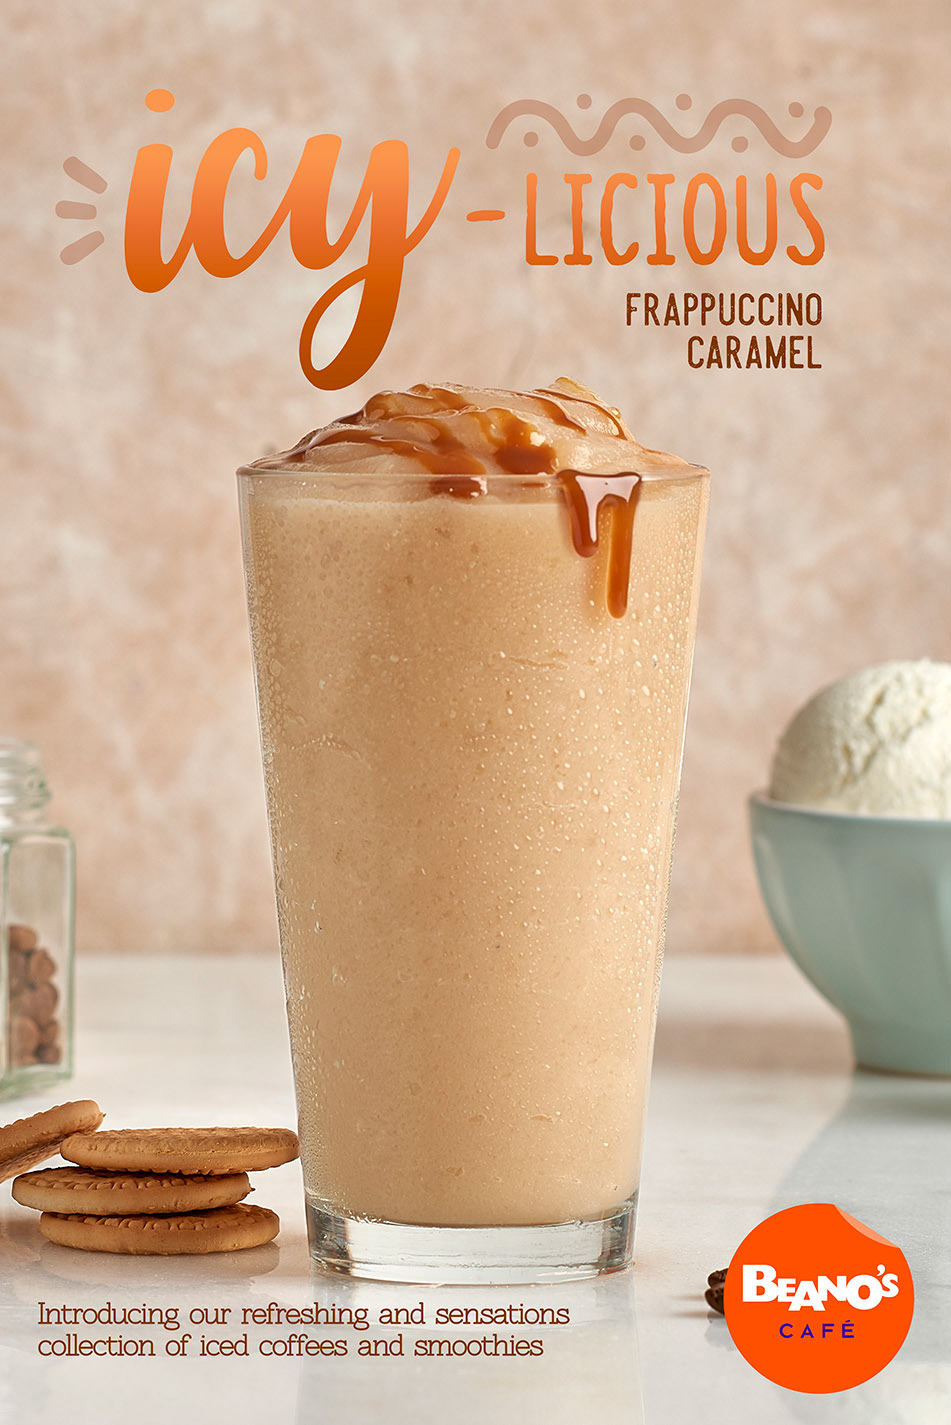 food styling drinks iced coffee cokctails Photography  Advertising  menu cafe